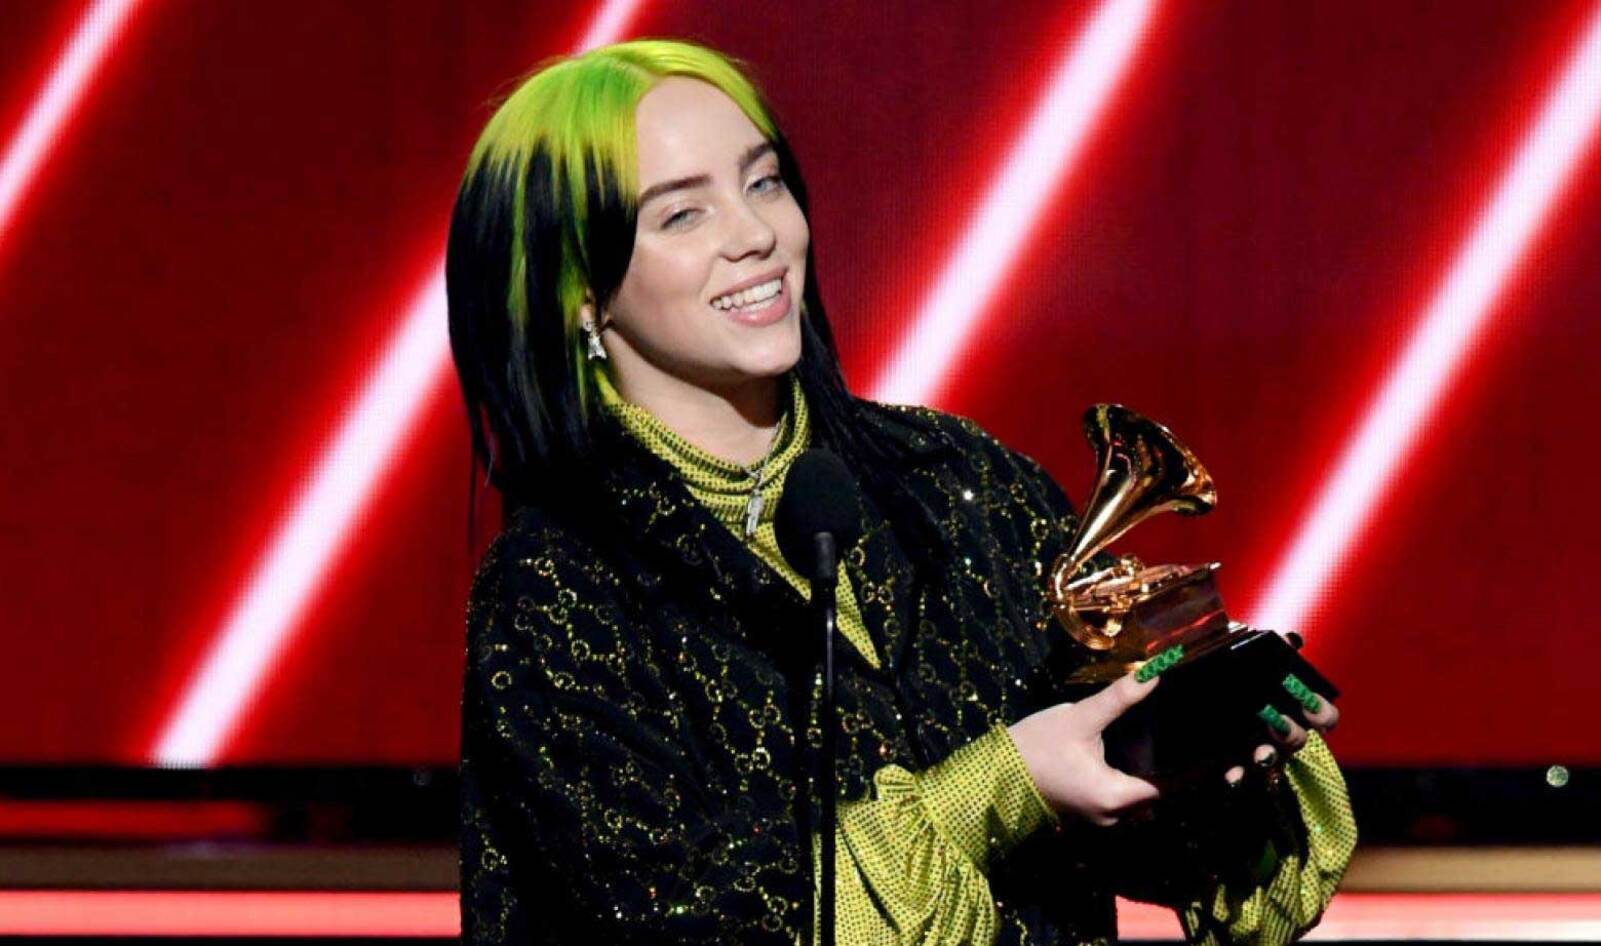 Vegan Singer Billie Eilish Becomes Youngest Artist to Win Grammy for Album of the Year